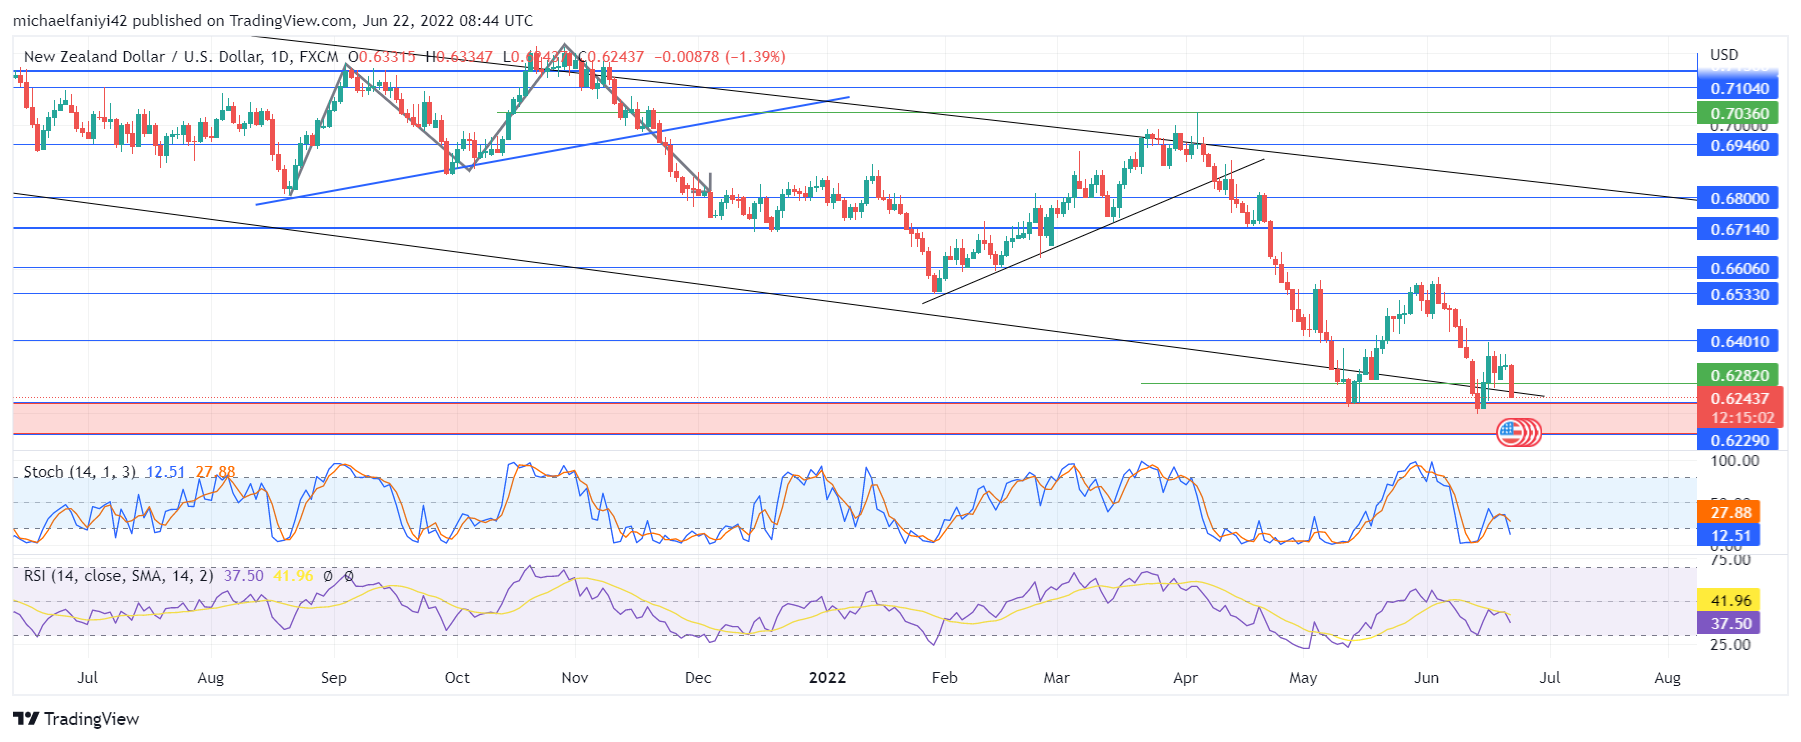 NZDUSD Receives Reinforcement at a Weekly Support Level